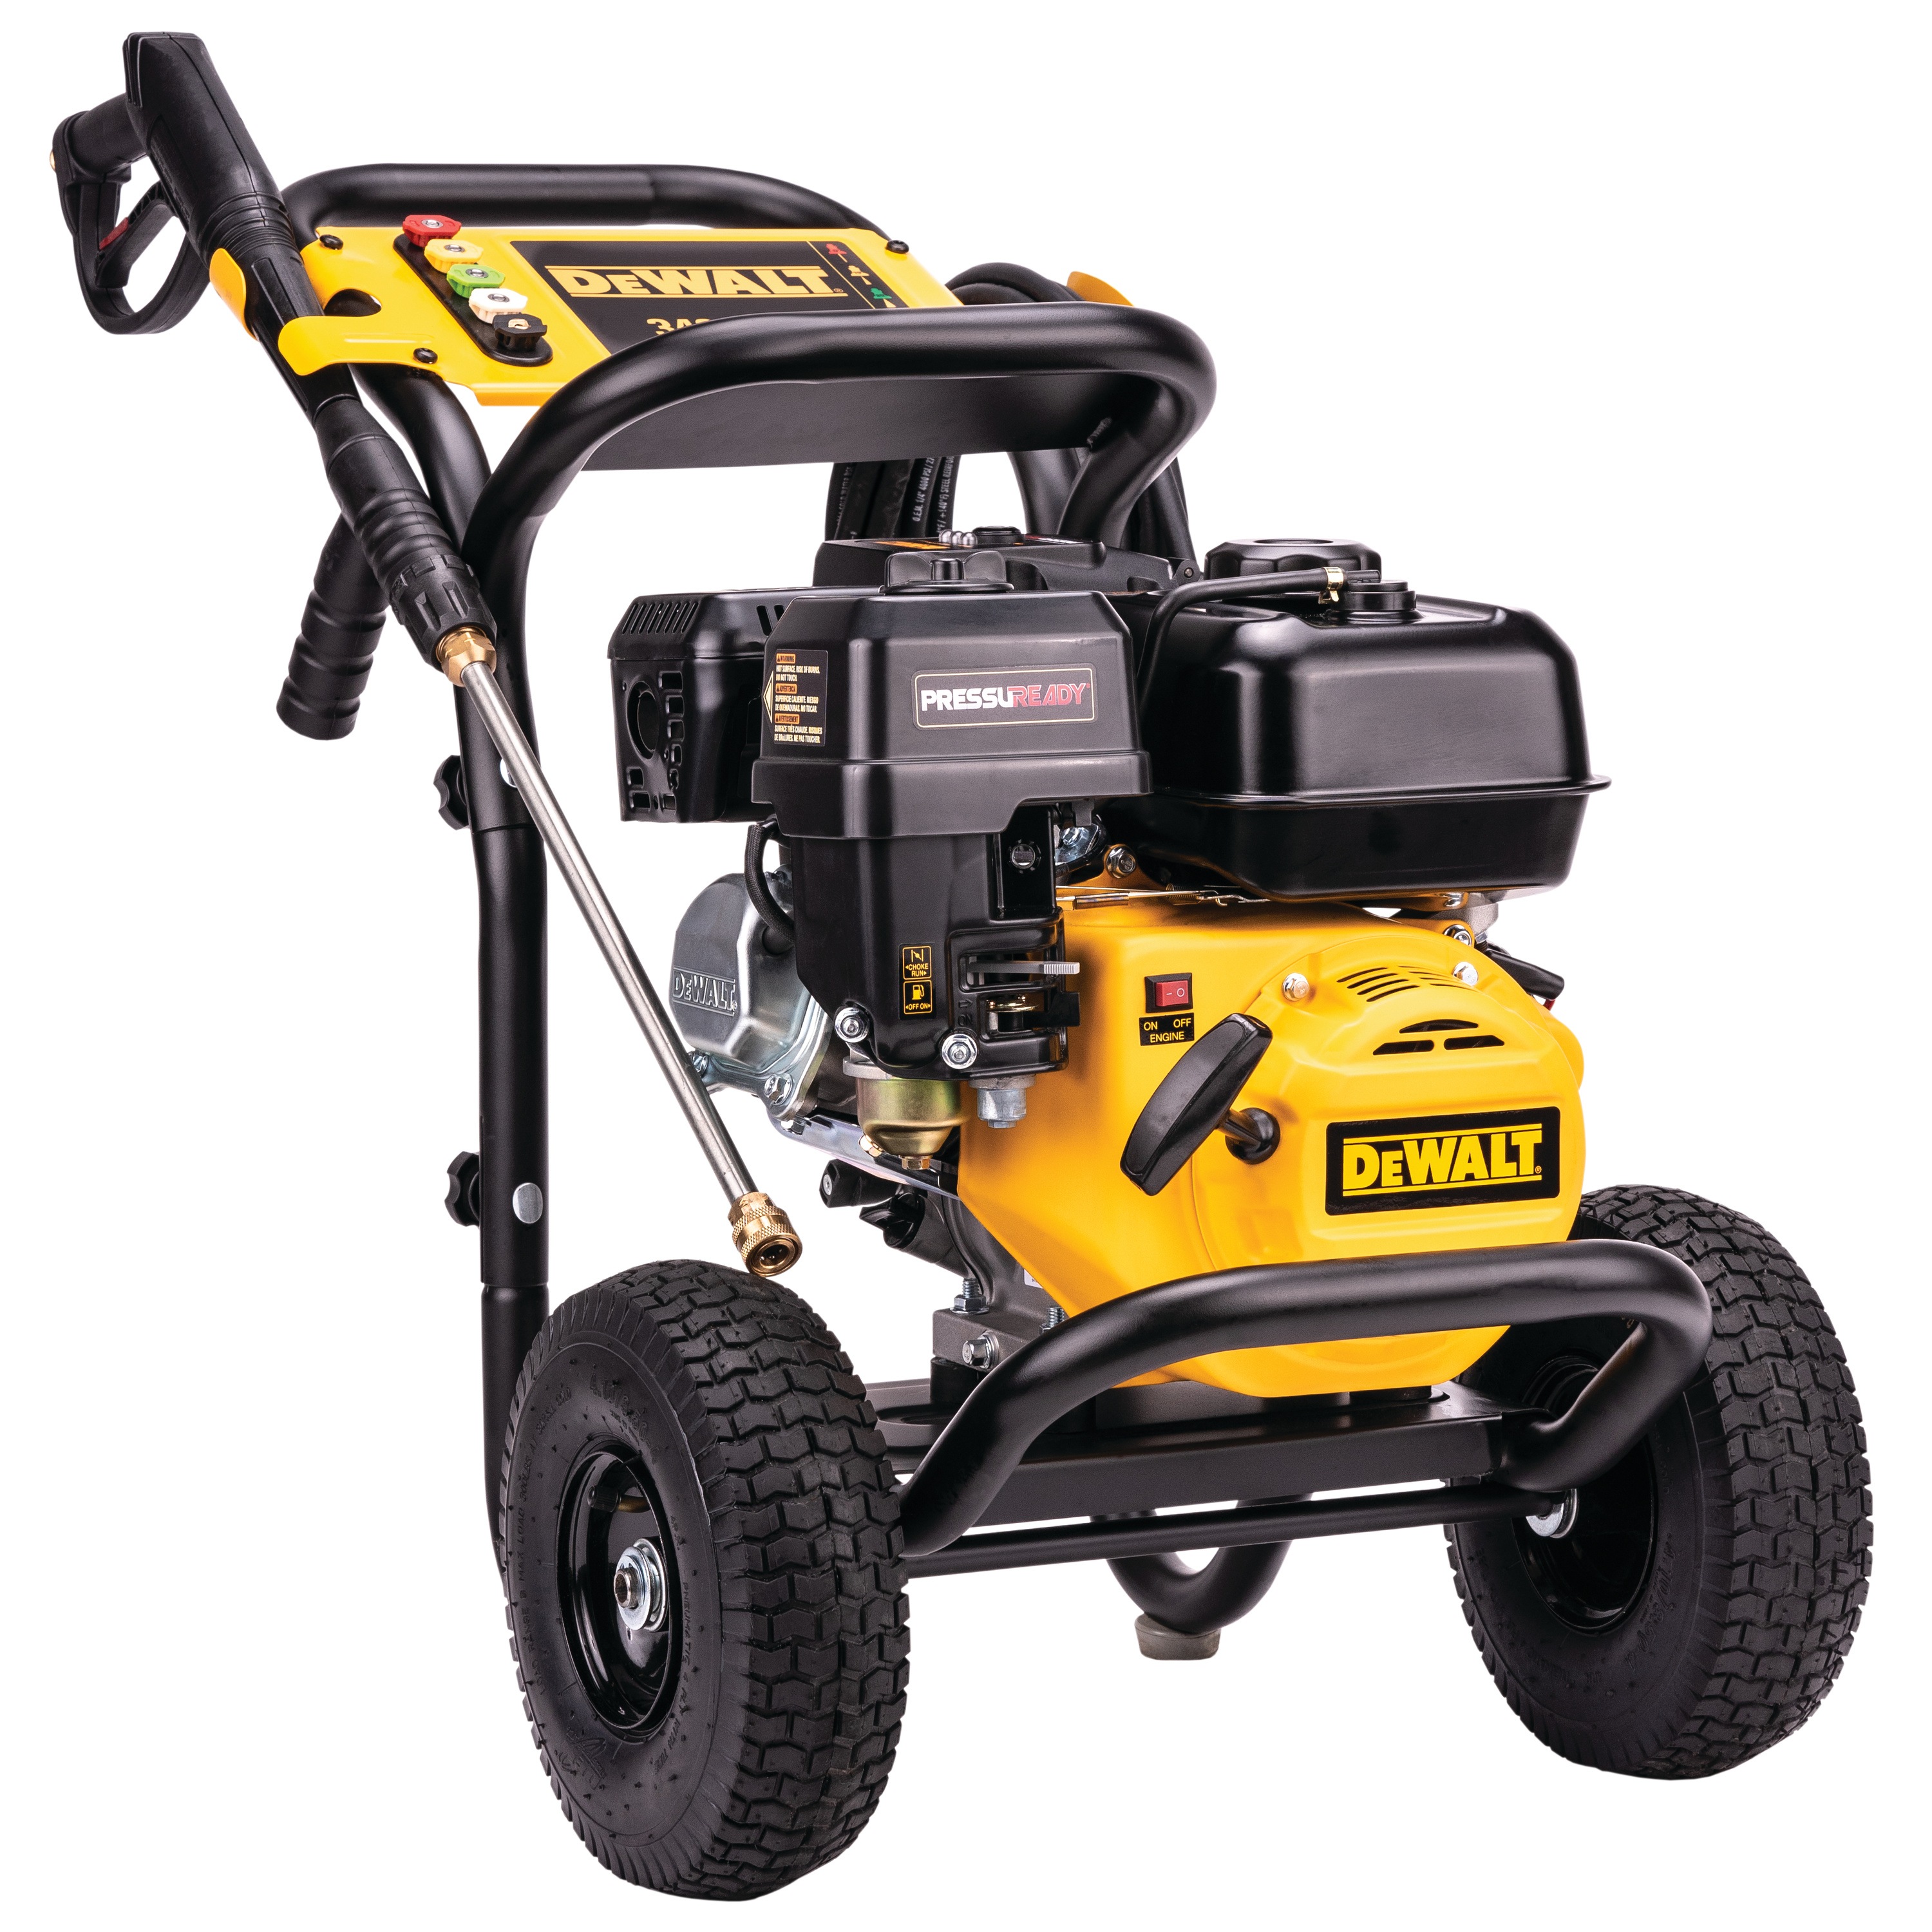 Side Profile of PressuReady 3400 PSI at 2.5 GPM Powered Cold Water Gas Pressure Washer.